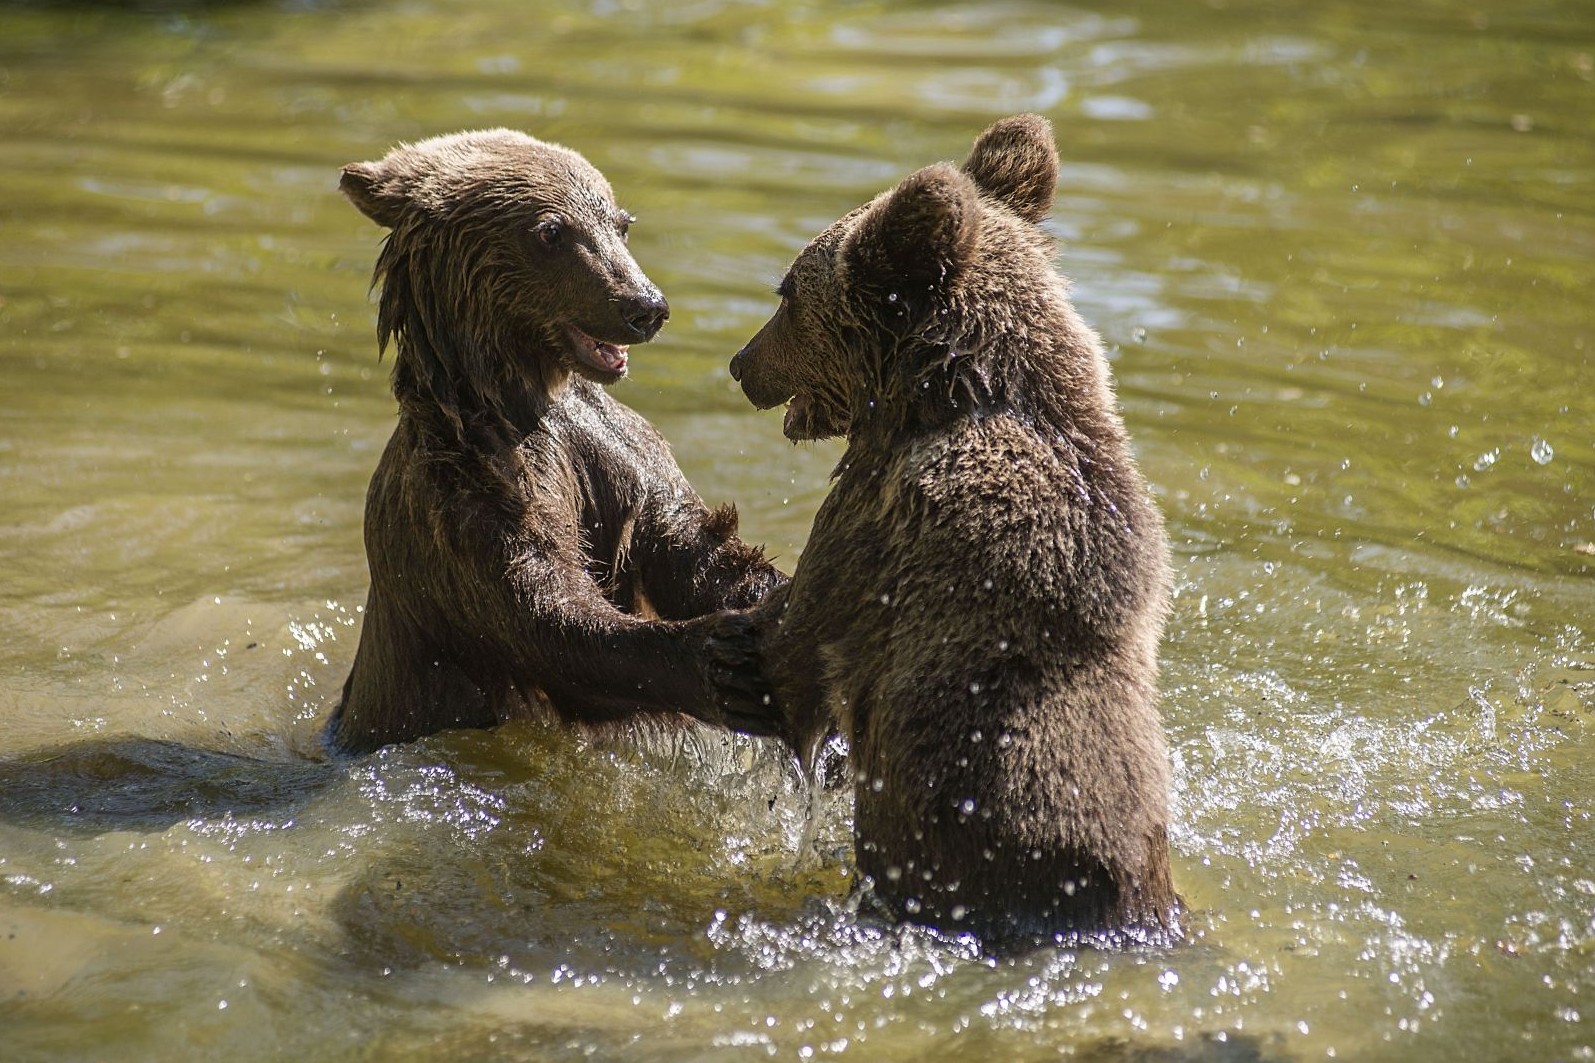 Two bears play in water at the Romanian bear sanctuary